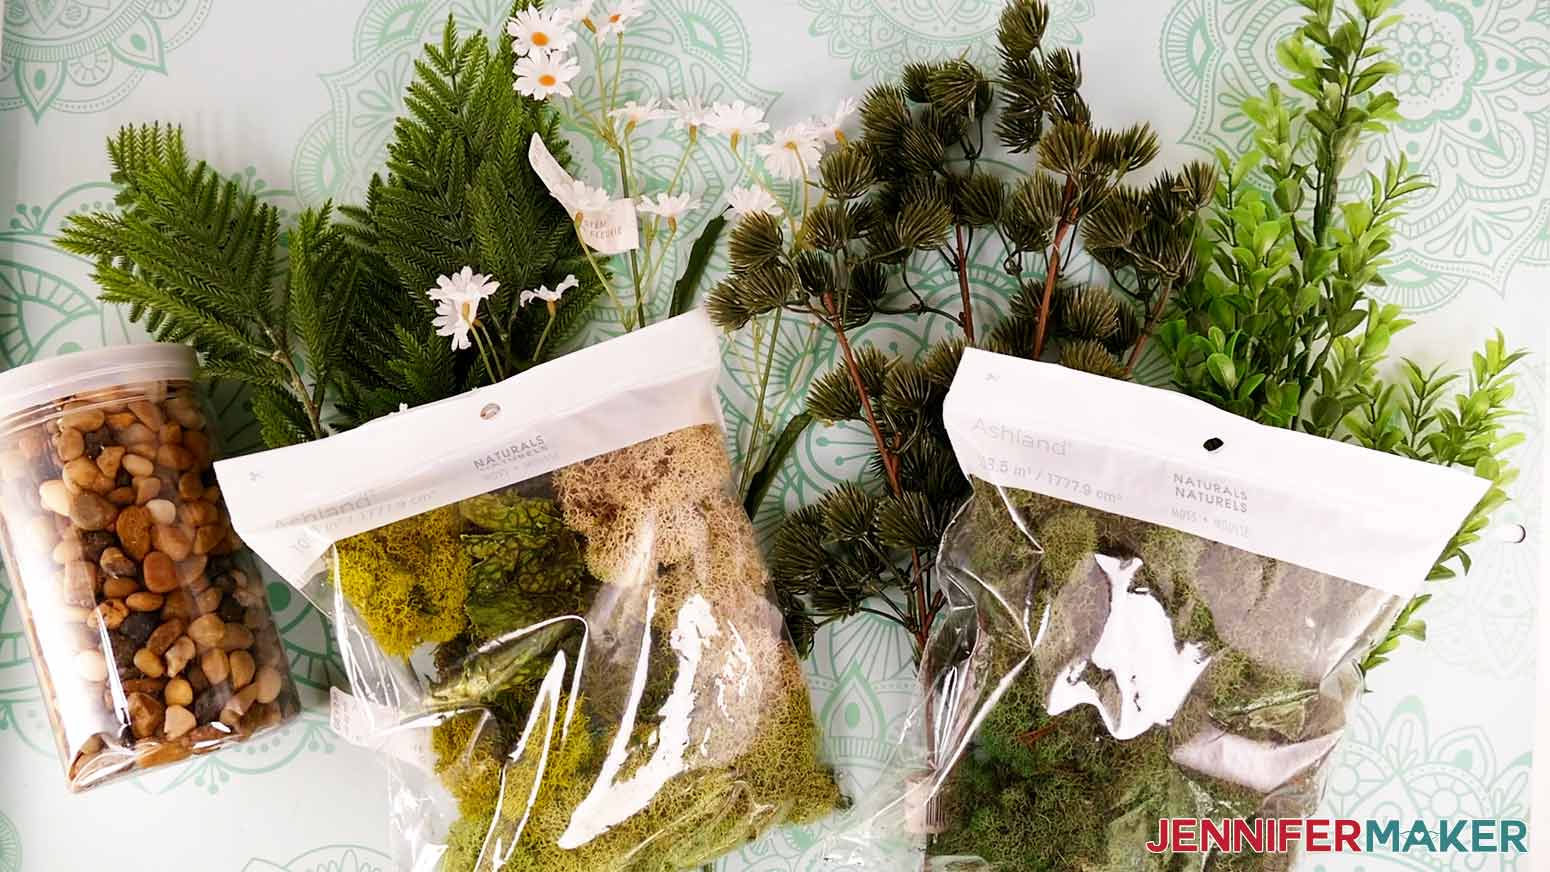 River rocks, floral branches, and two types of moss decorations for the enchanted forest diy book nook